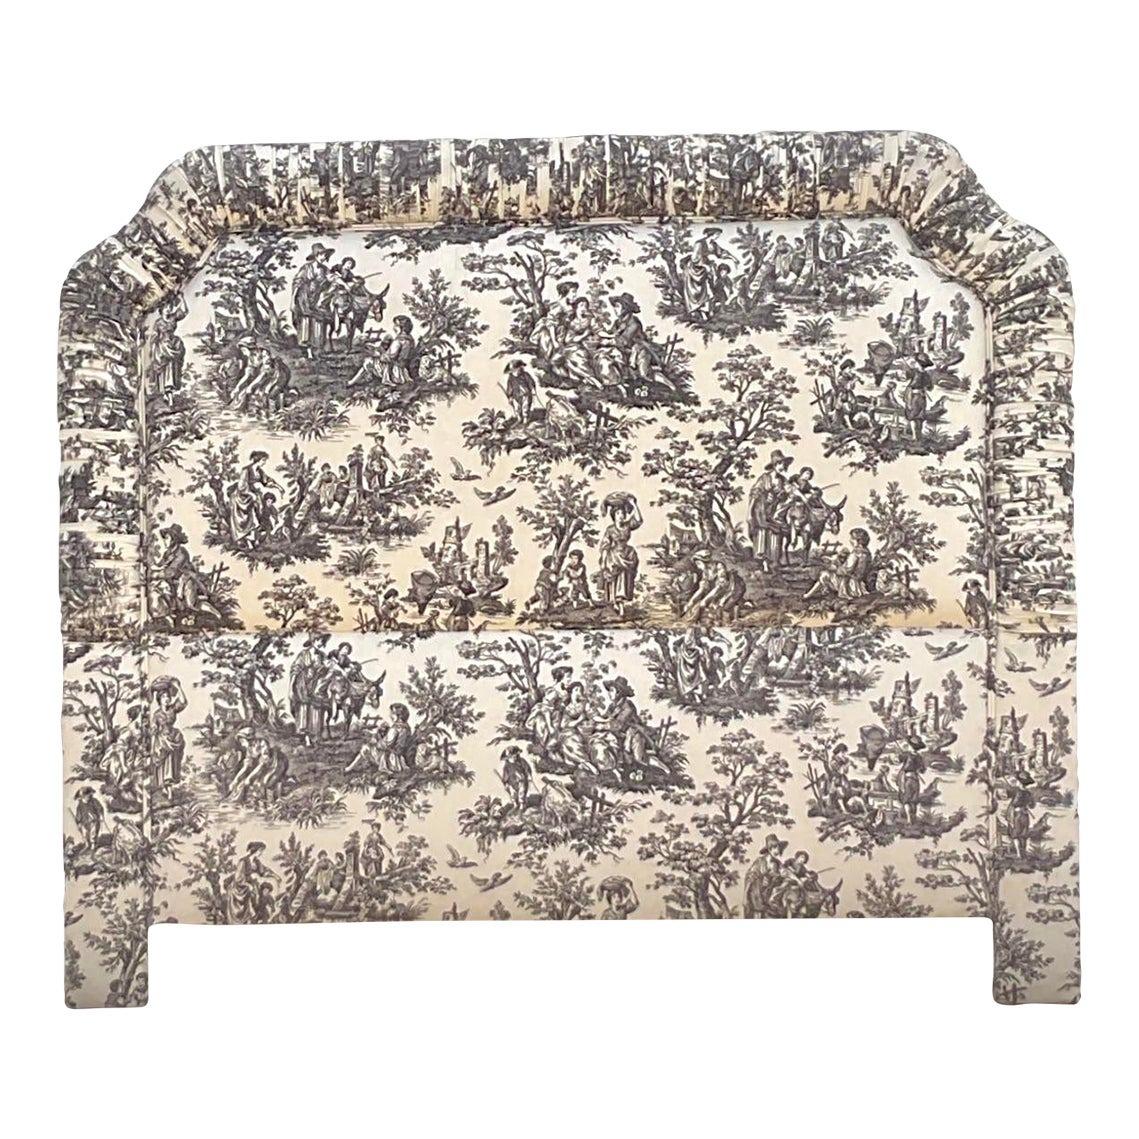 Late 20th Century Vintage Regency Rusched Toile Upholstered Queen Headboard For Sale